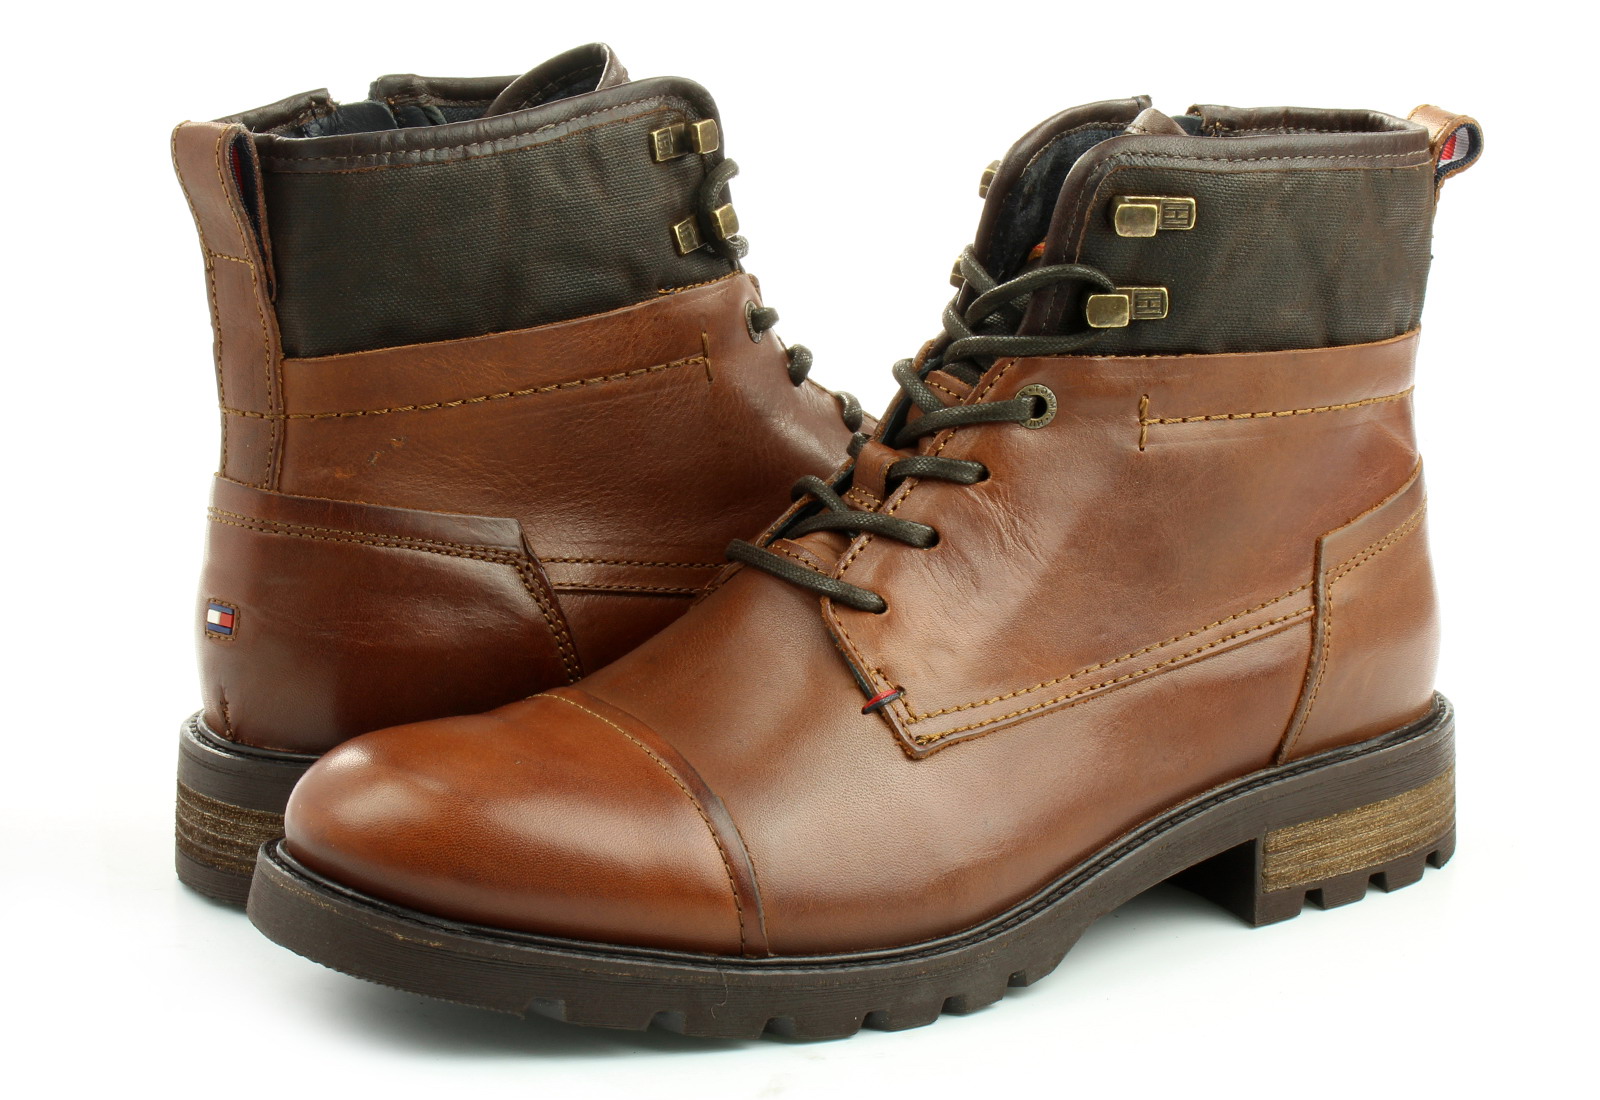 Hilfiger Outdoor boots - Curtis 13a - 17F-0711-906 - Online shop for sneakers, shoes and boots